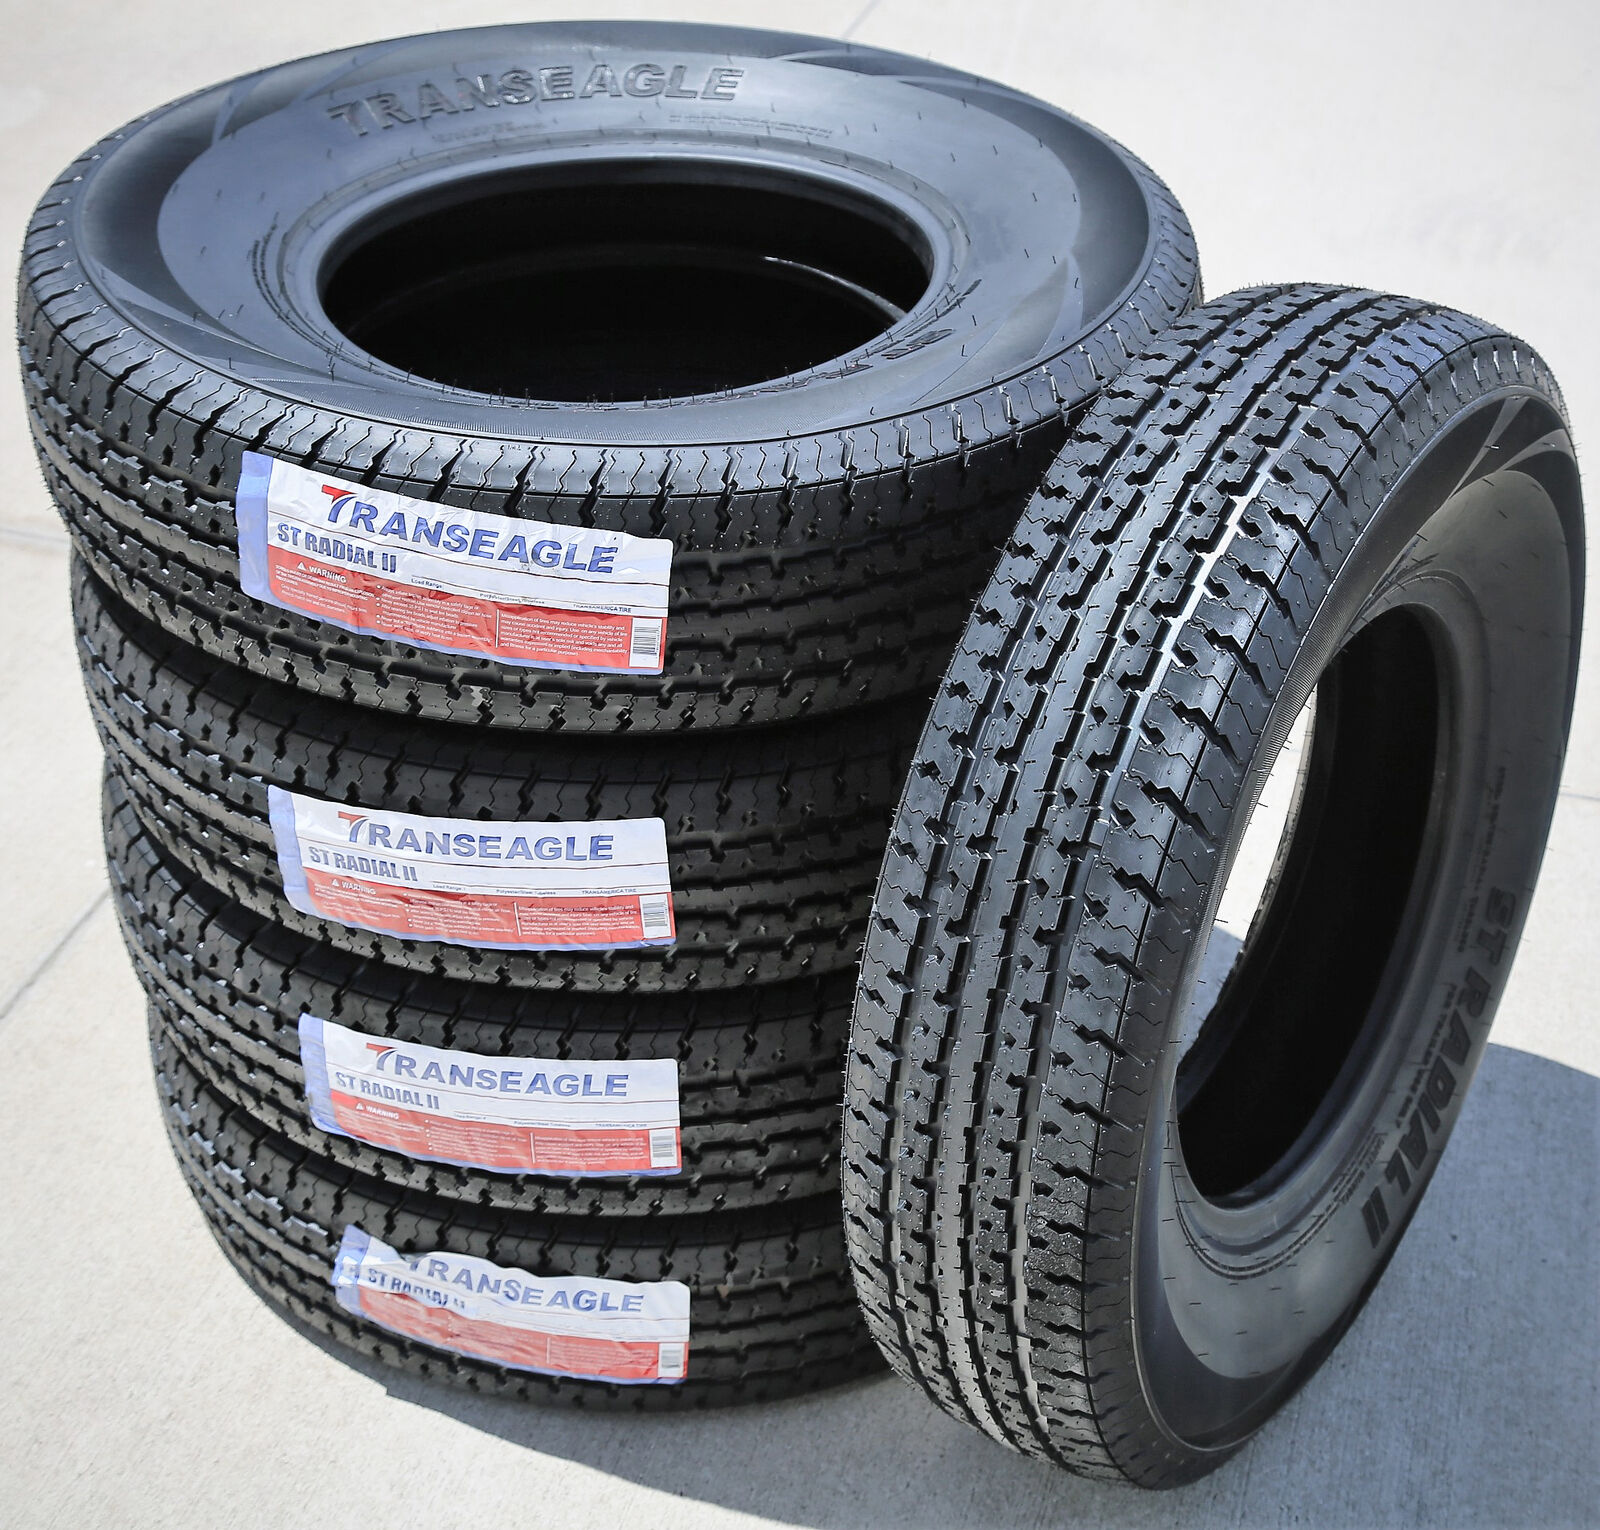 5 Tires Transeagle ST Radial II Steel Belted ST 225/75R15 Load E 10 Ply Trailer